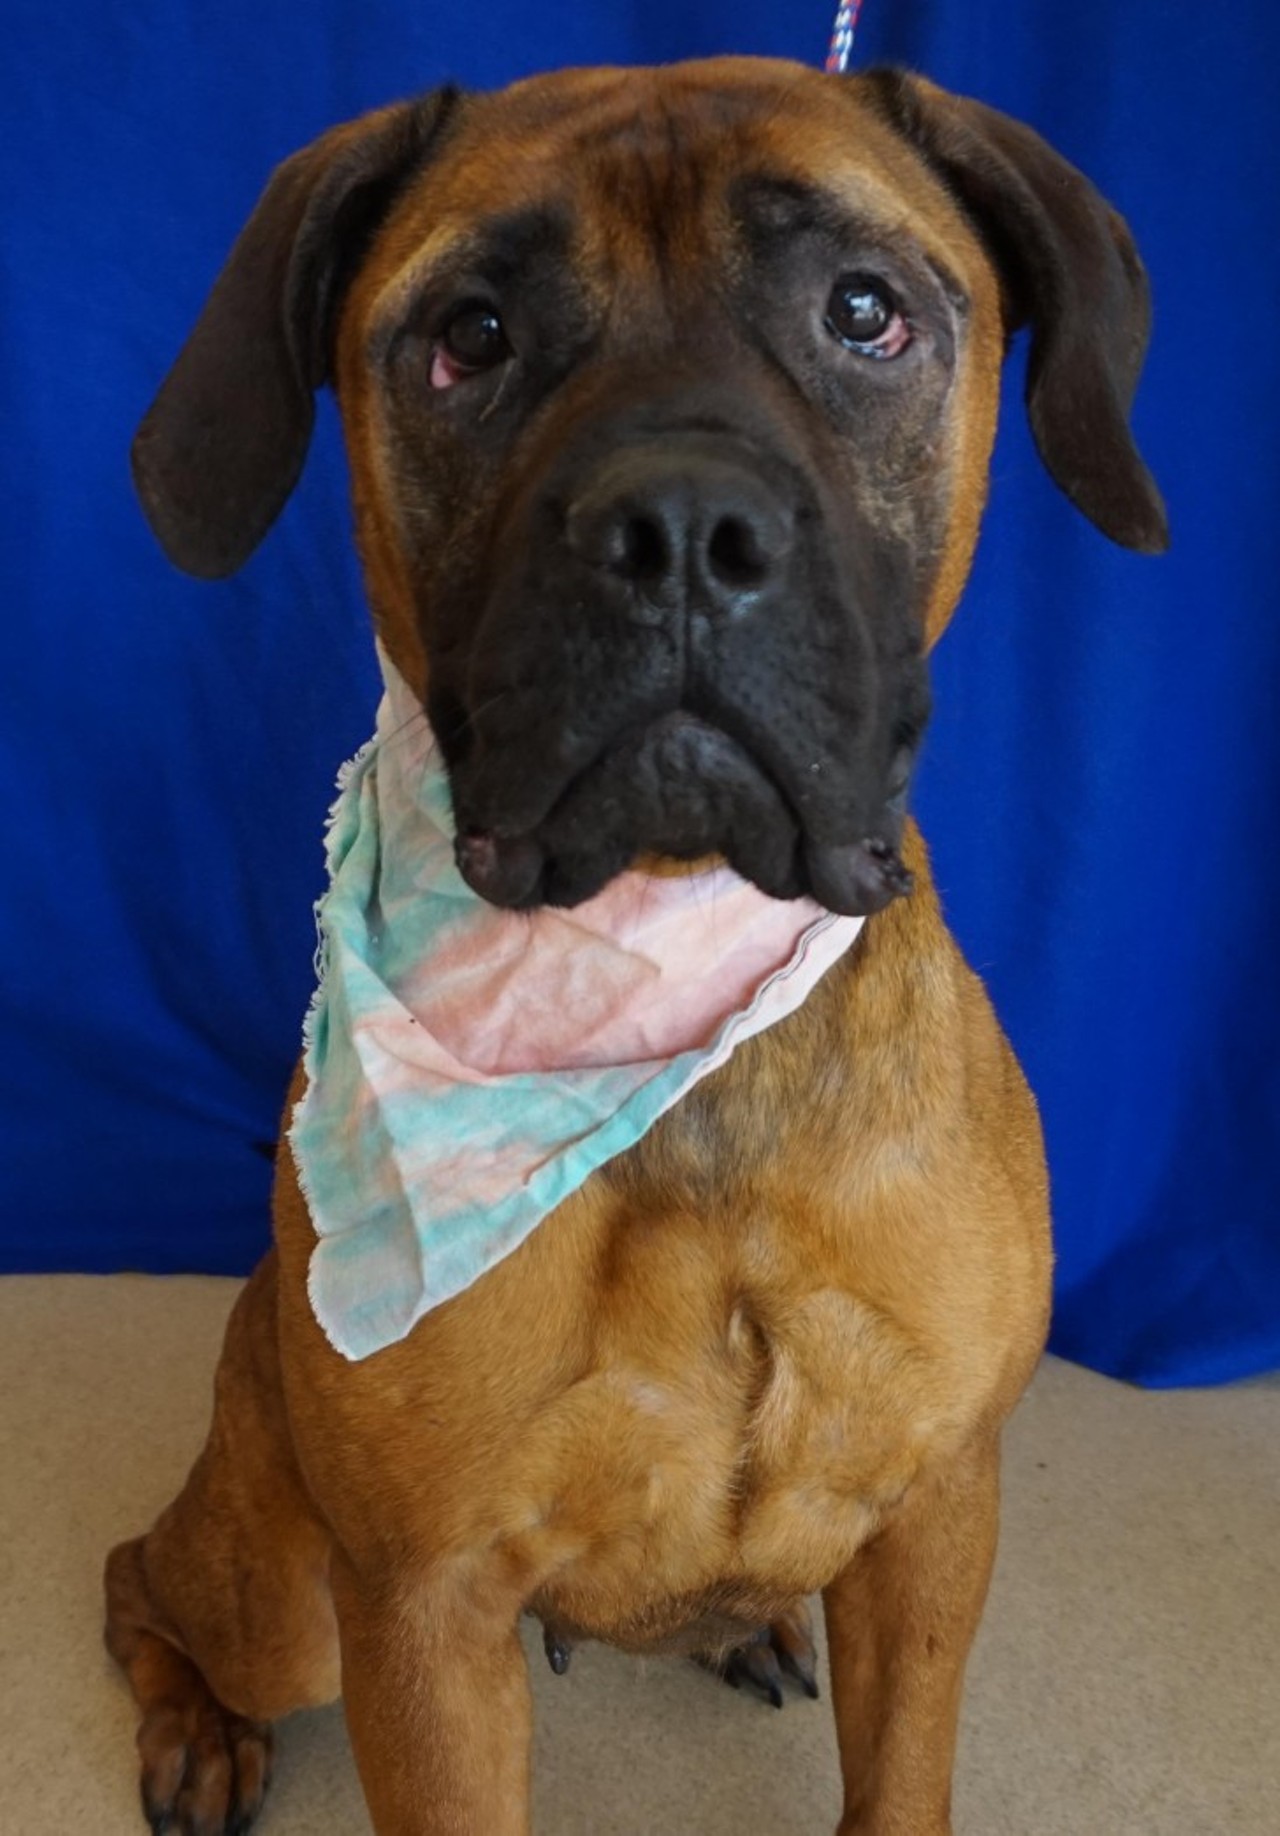 NAME: Brunhilda
GENDER: Female
BREED: Mastiff
AGE: 6 years
WEIGHT: 67 pounds
SPECIAL CONSIDERATIONS: None
REASON I CAME TO MHS: Rescued in Detroit
LOCATION: Rochester Hills Center for Animal Care
ID NUMBER: 872238